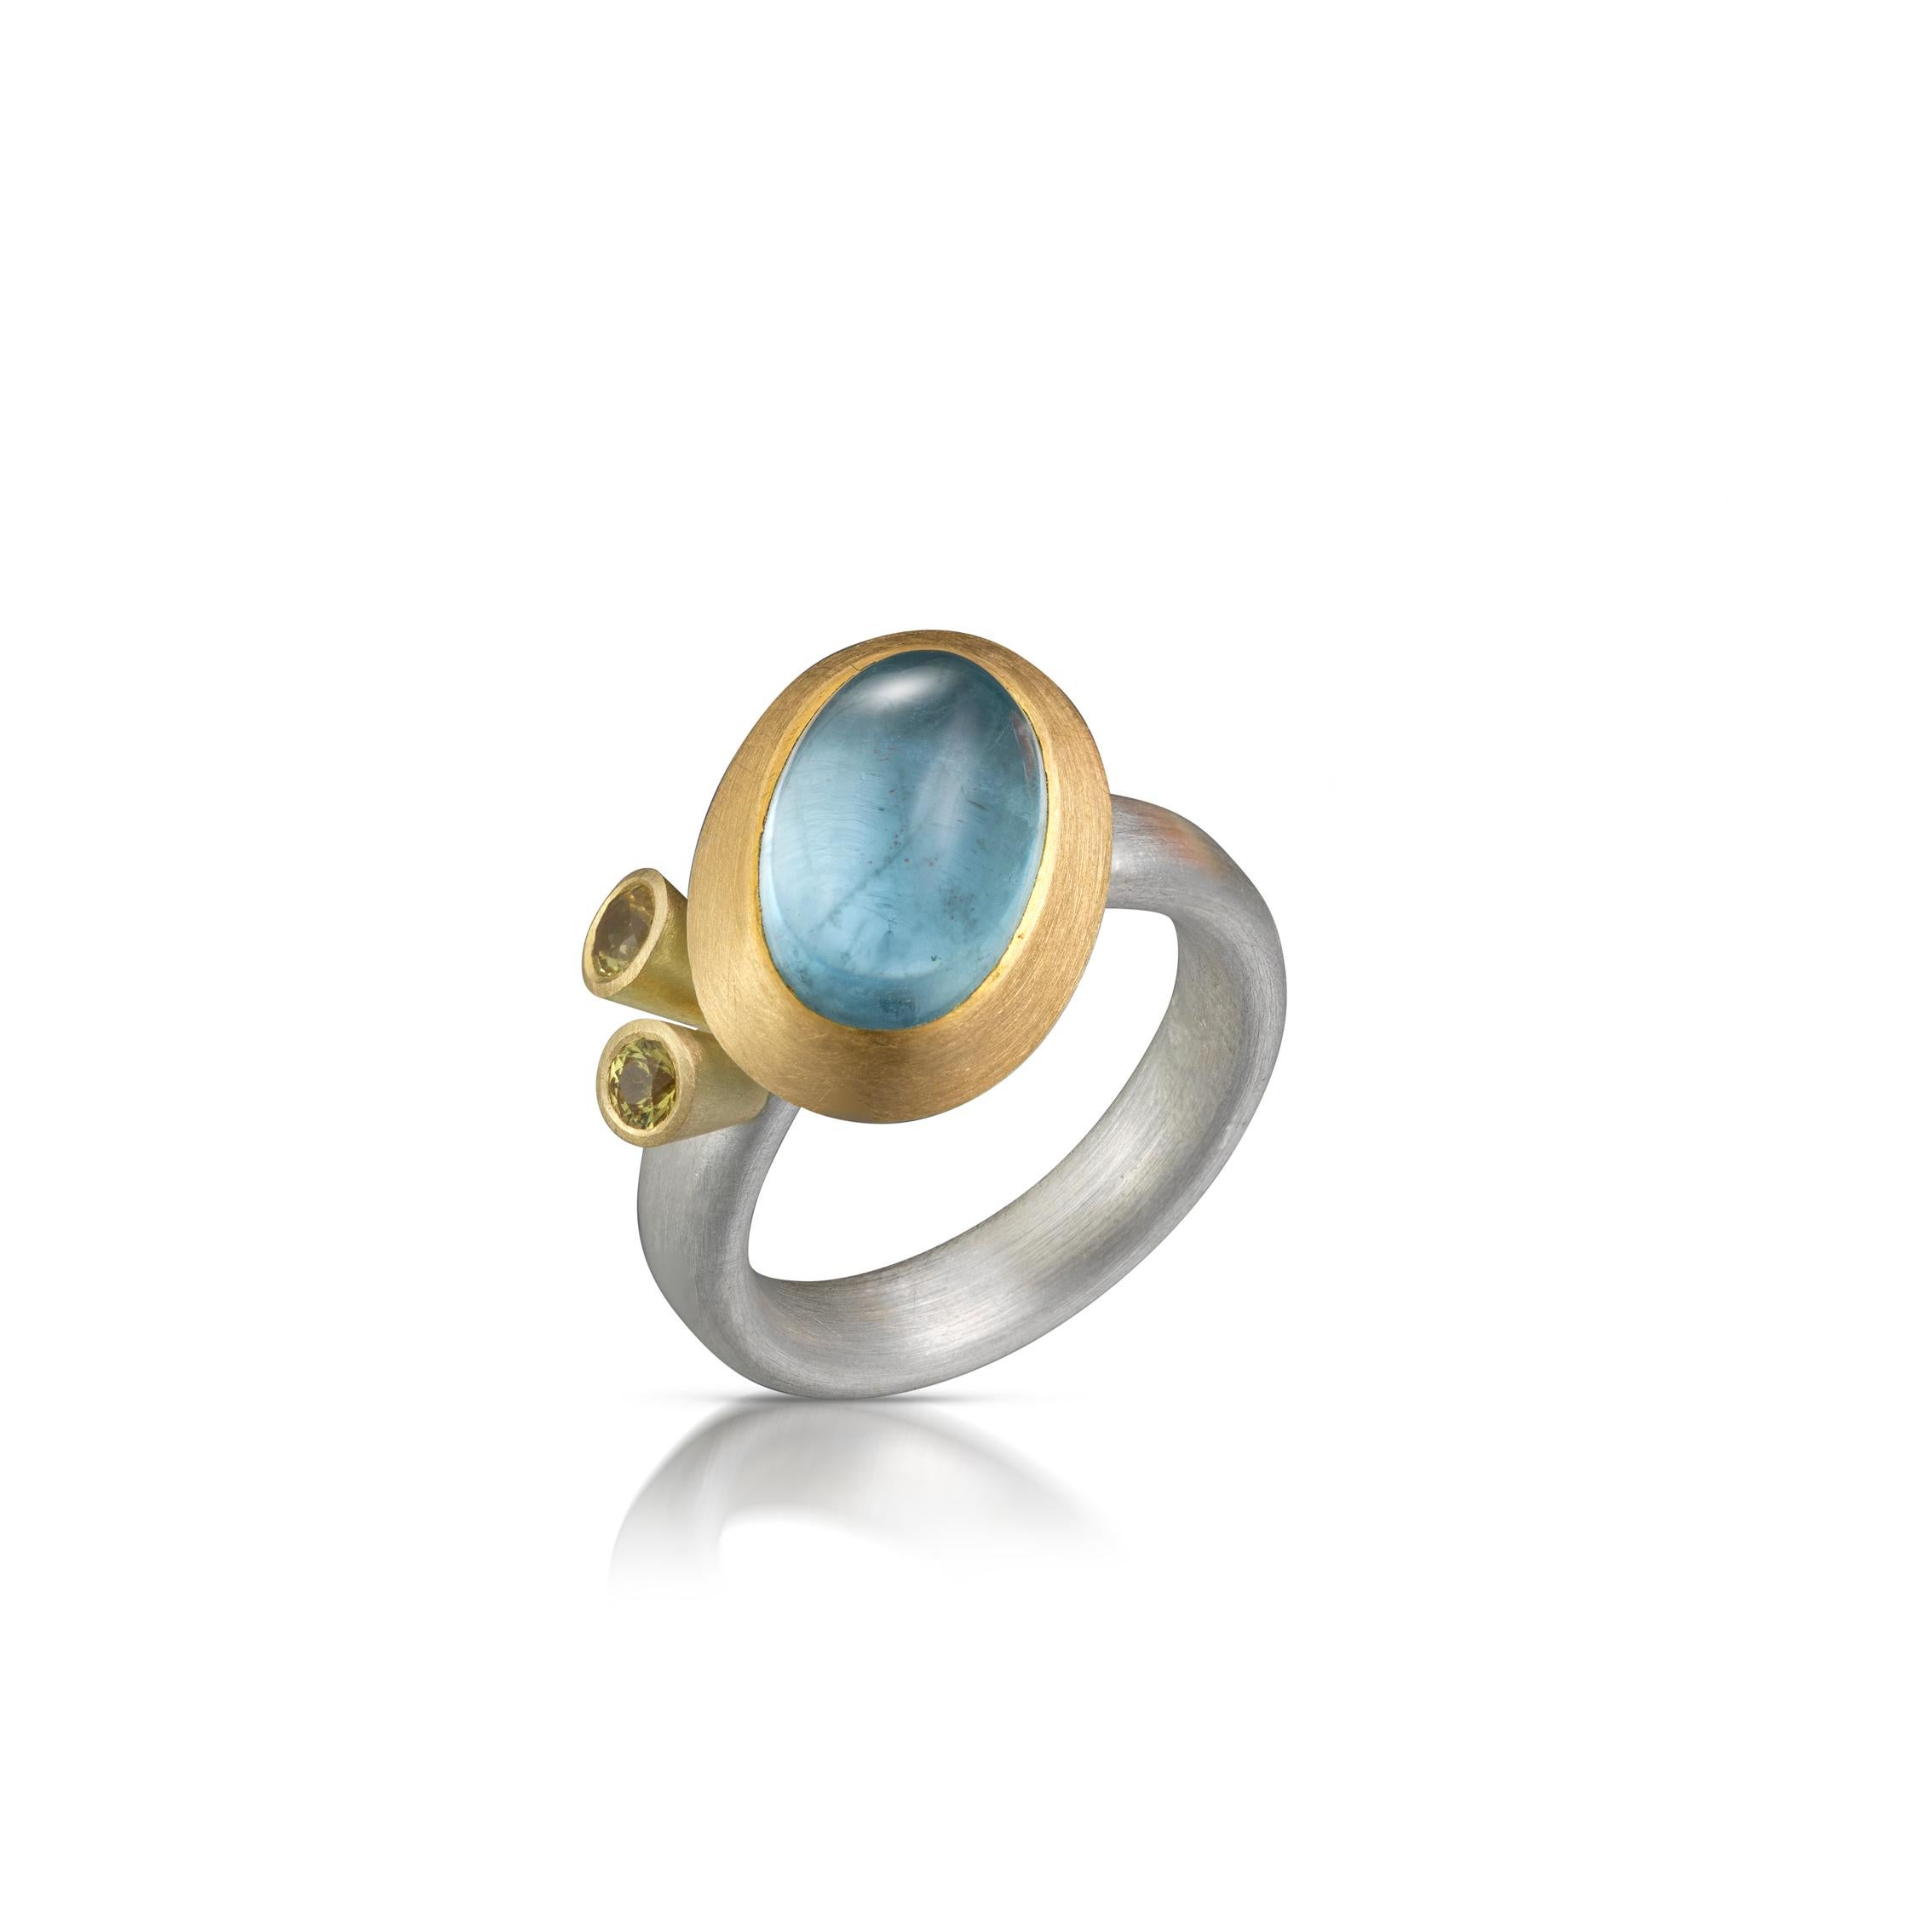 Bright aquamarine cabochon paired with a duo of rare Australian yellow sapphires, making up this gorgeous statement ring. The cabochon is set in 22ct yellow gold, the yellow sapphires are set in 18ct yellow gold on a silver oval section band.


Item